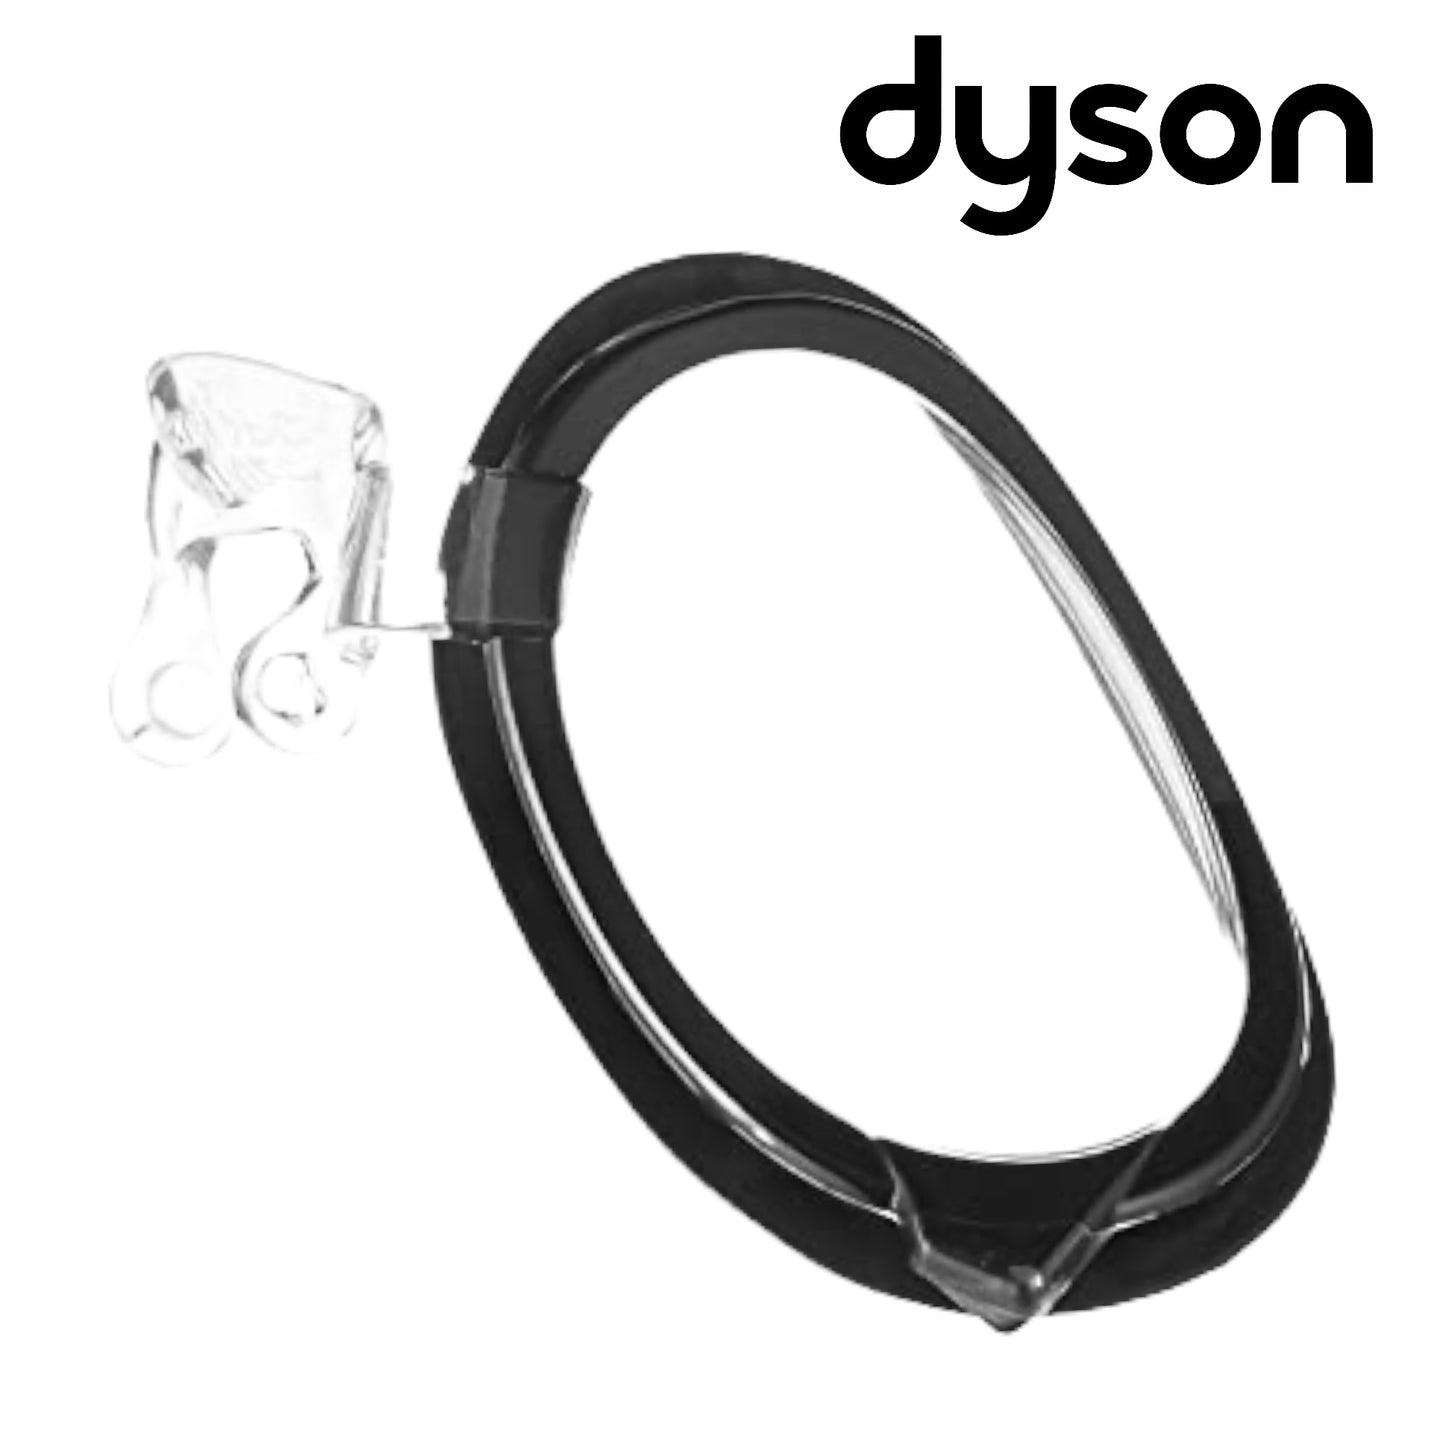 NEW GENUINE Dyson UP13 UP20 DC41 DC65 DC66 Duct Hatch Cover CAP LID - 920591-01